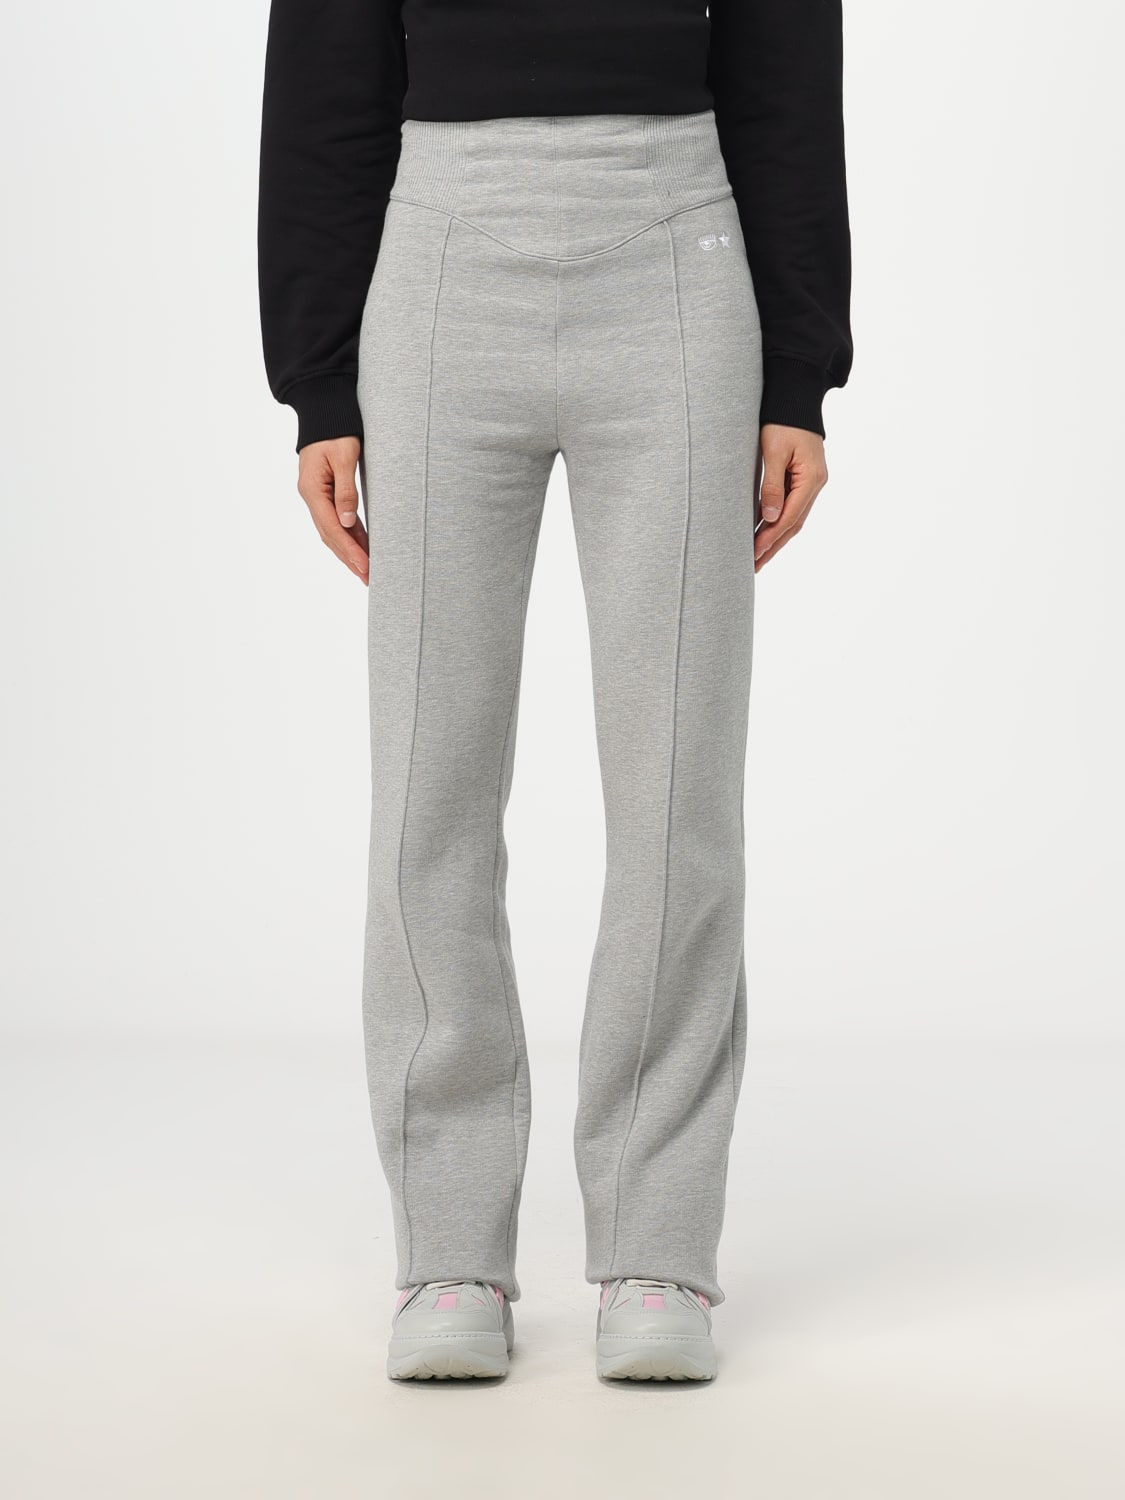 A Different Way to Wear Track Pants - Chiara